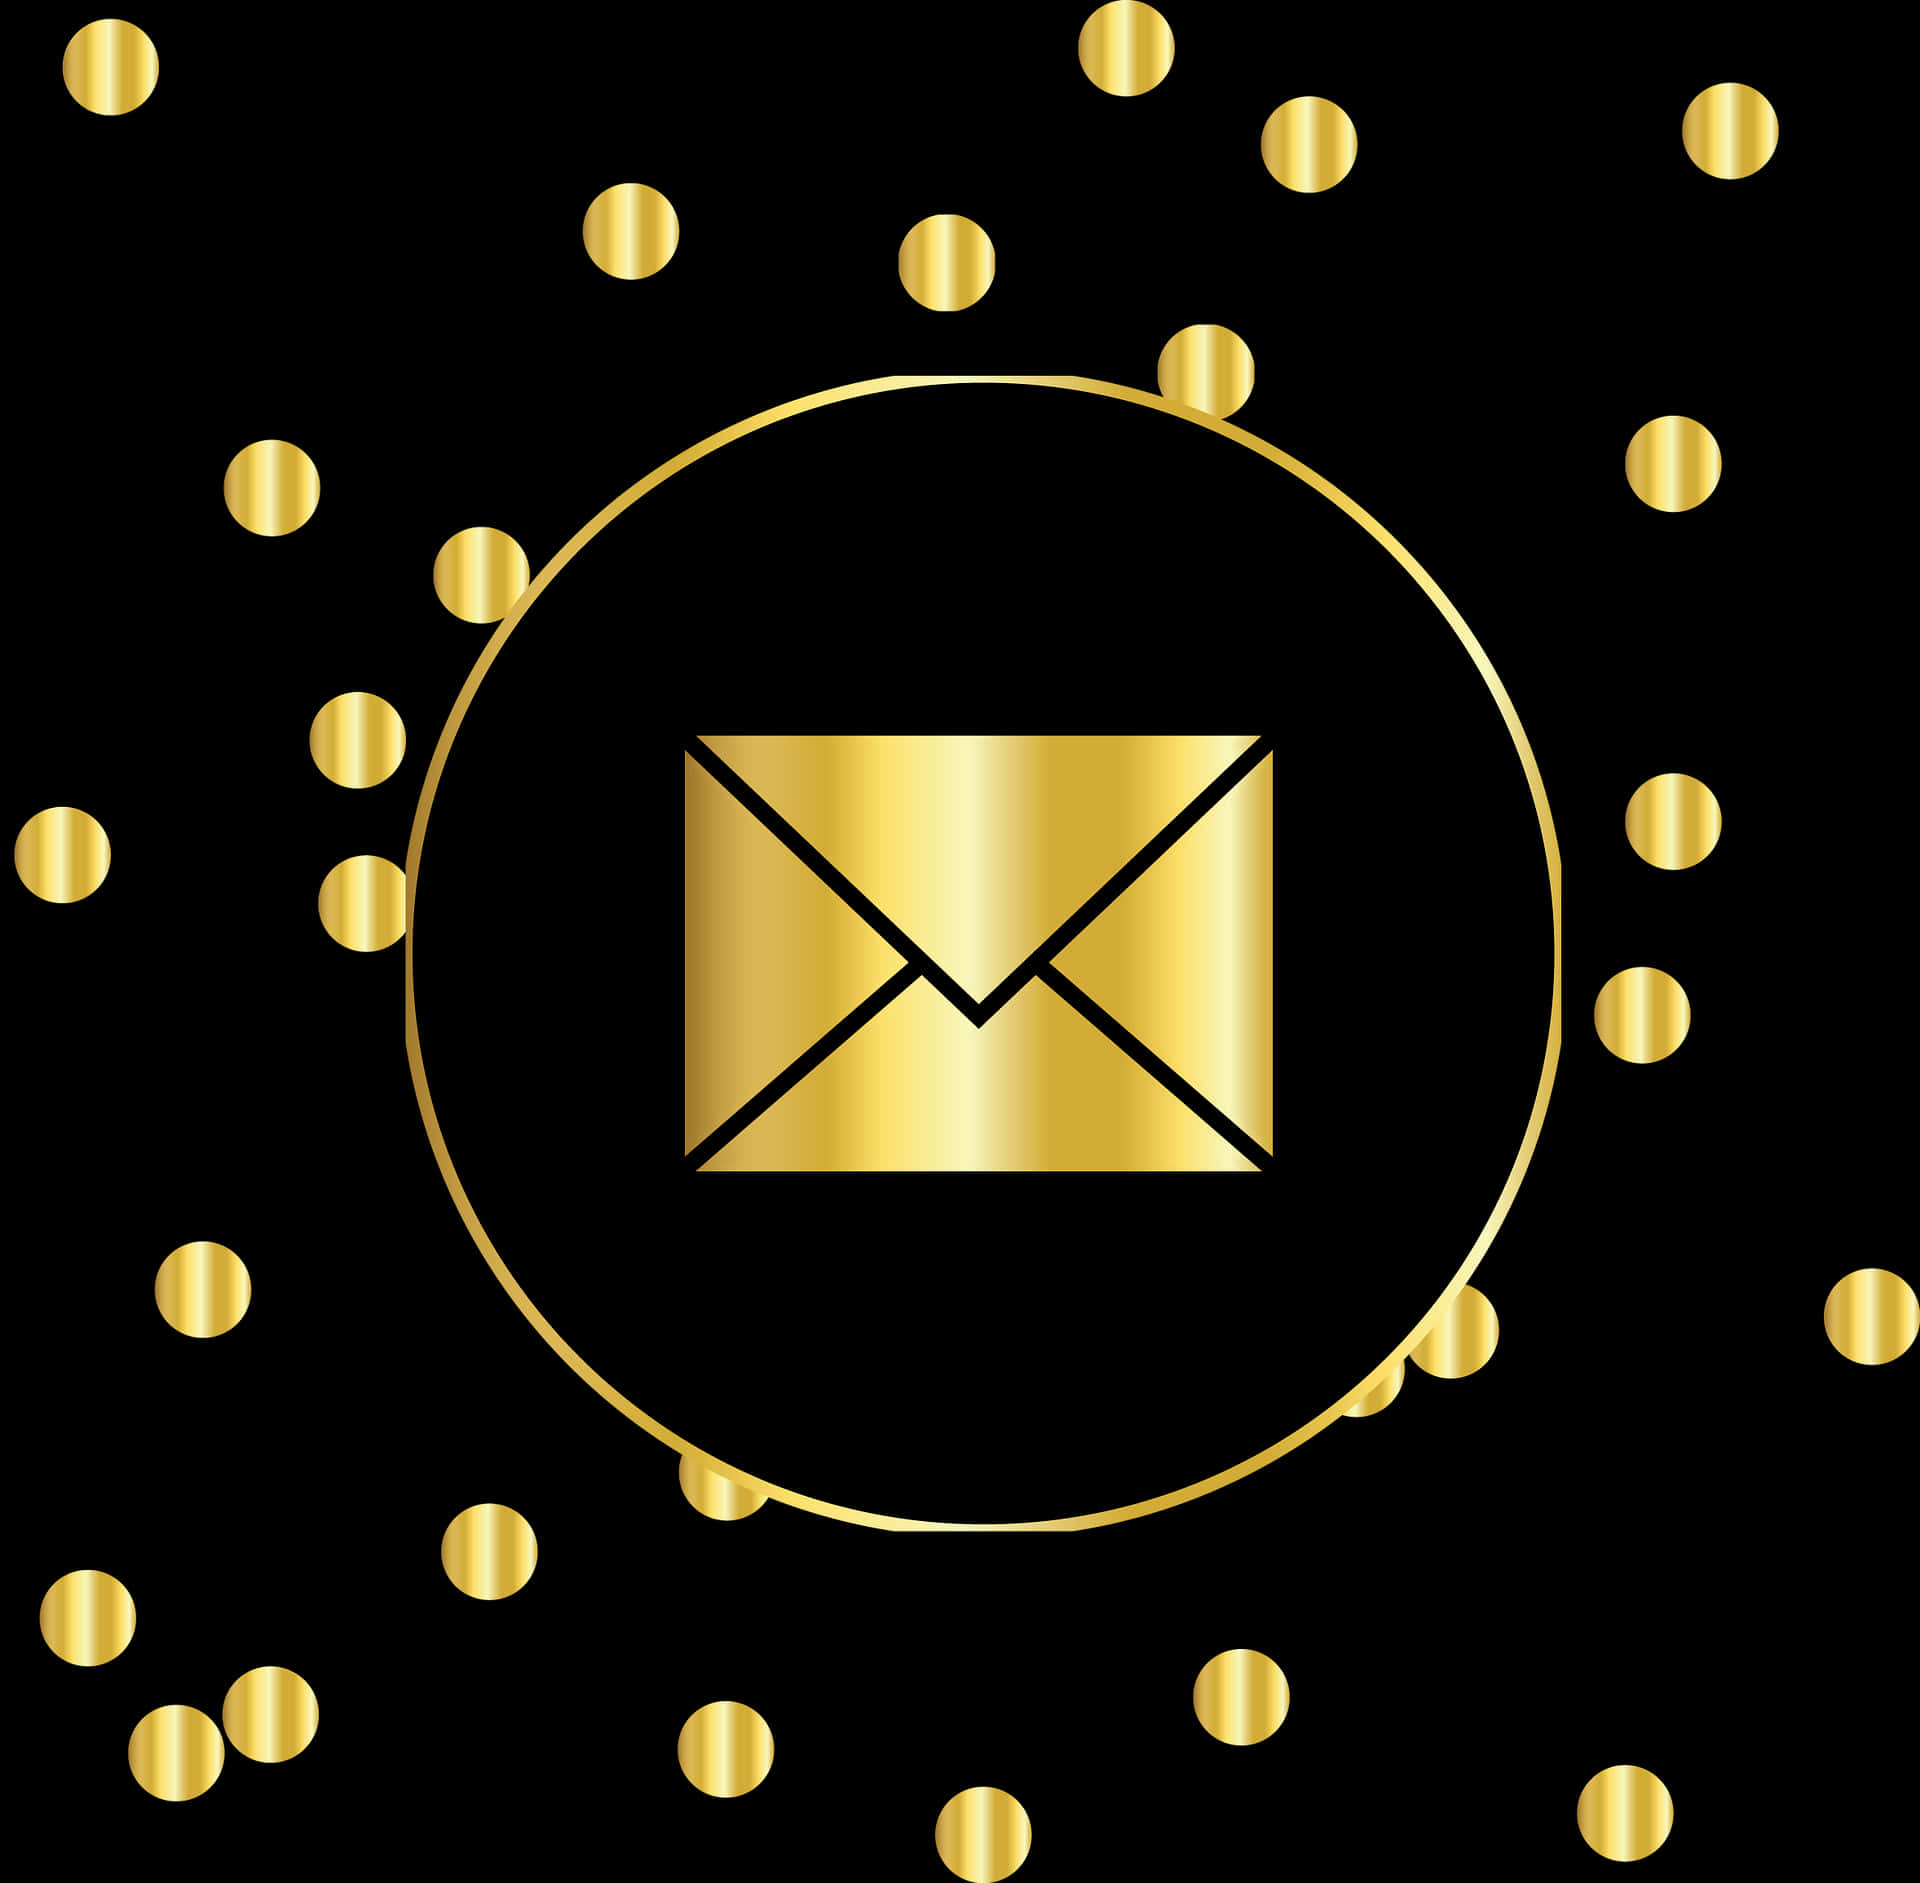 A Gold Envelope In A Circle With Dots Around It